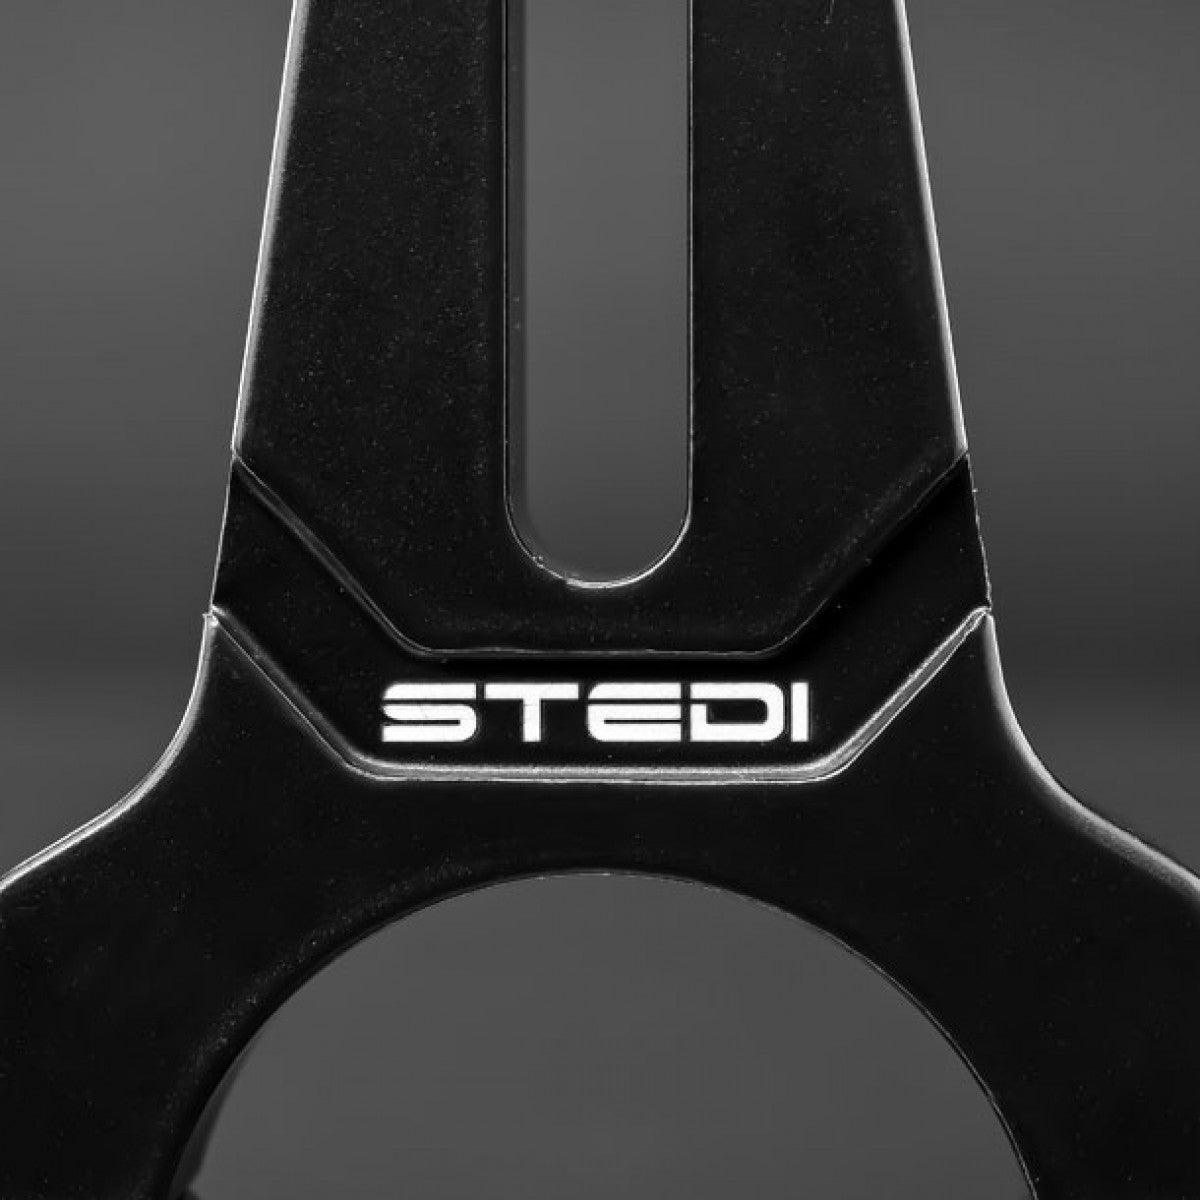 STEDI VICE CLAMP Pipe Clamp Mounting Brackets | Black